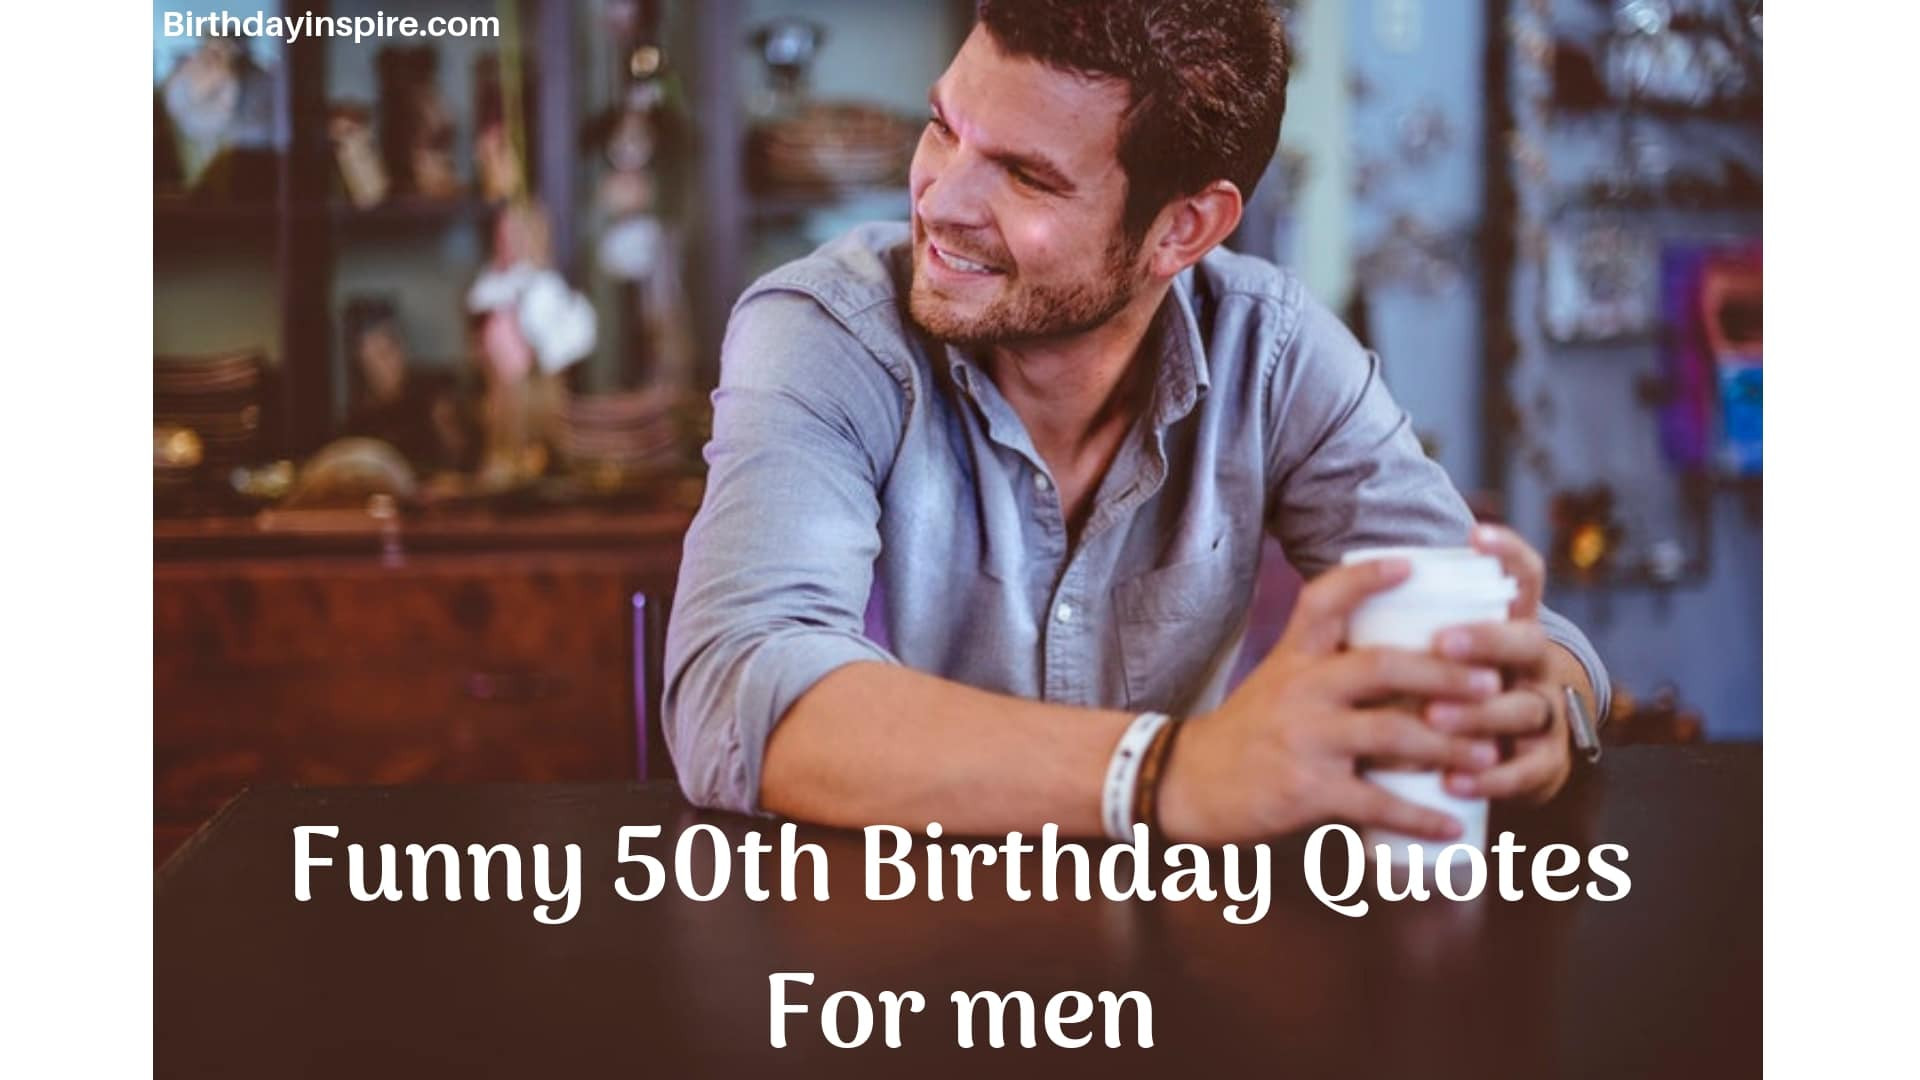 50th Birthday Quotes Funny
 45 Hilarious 50th Birthday Quotes For Men Birthday Inspire